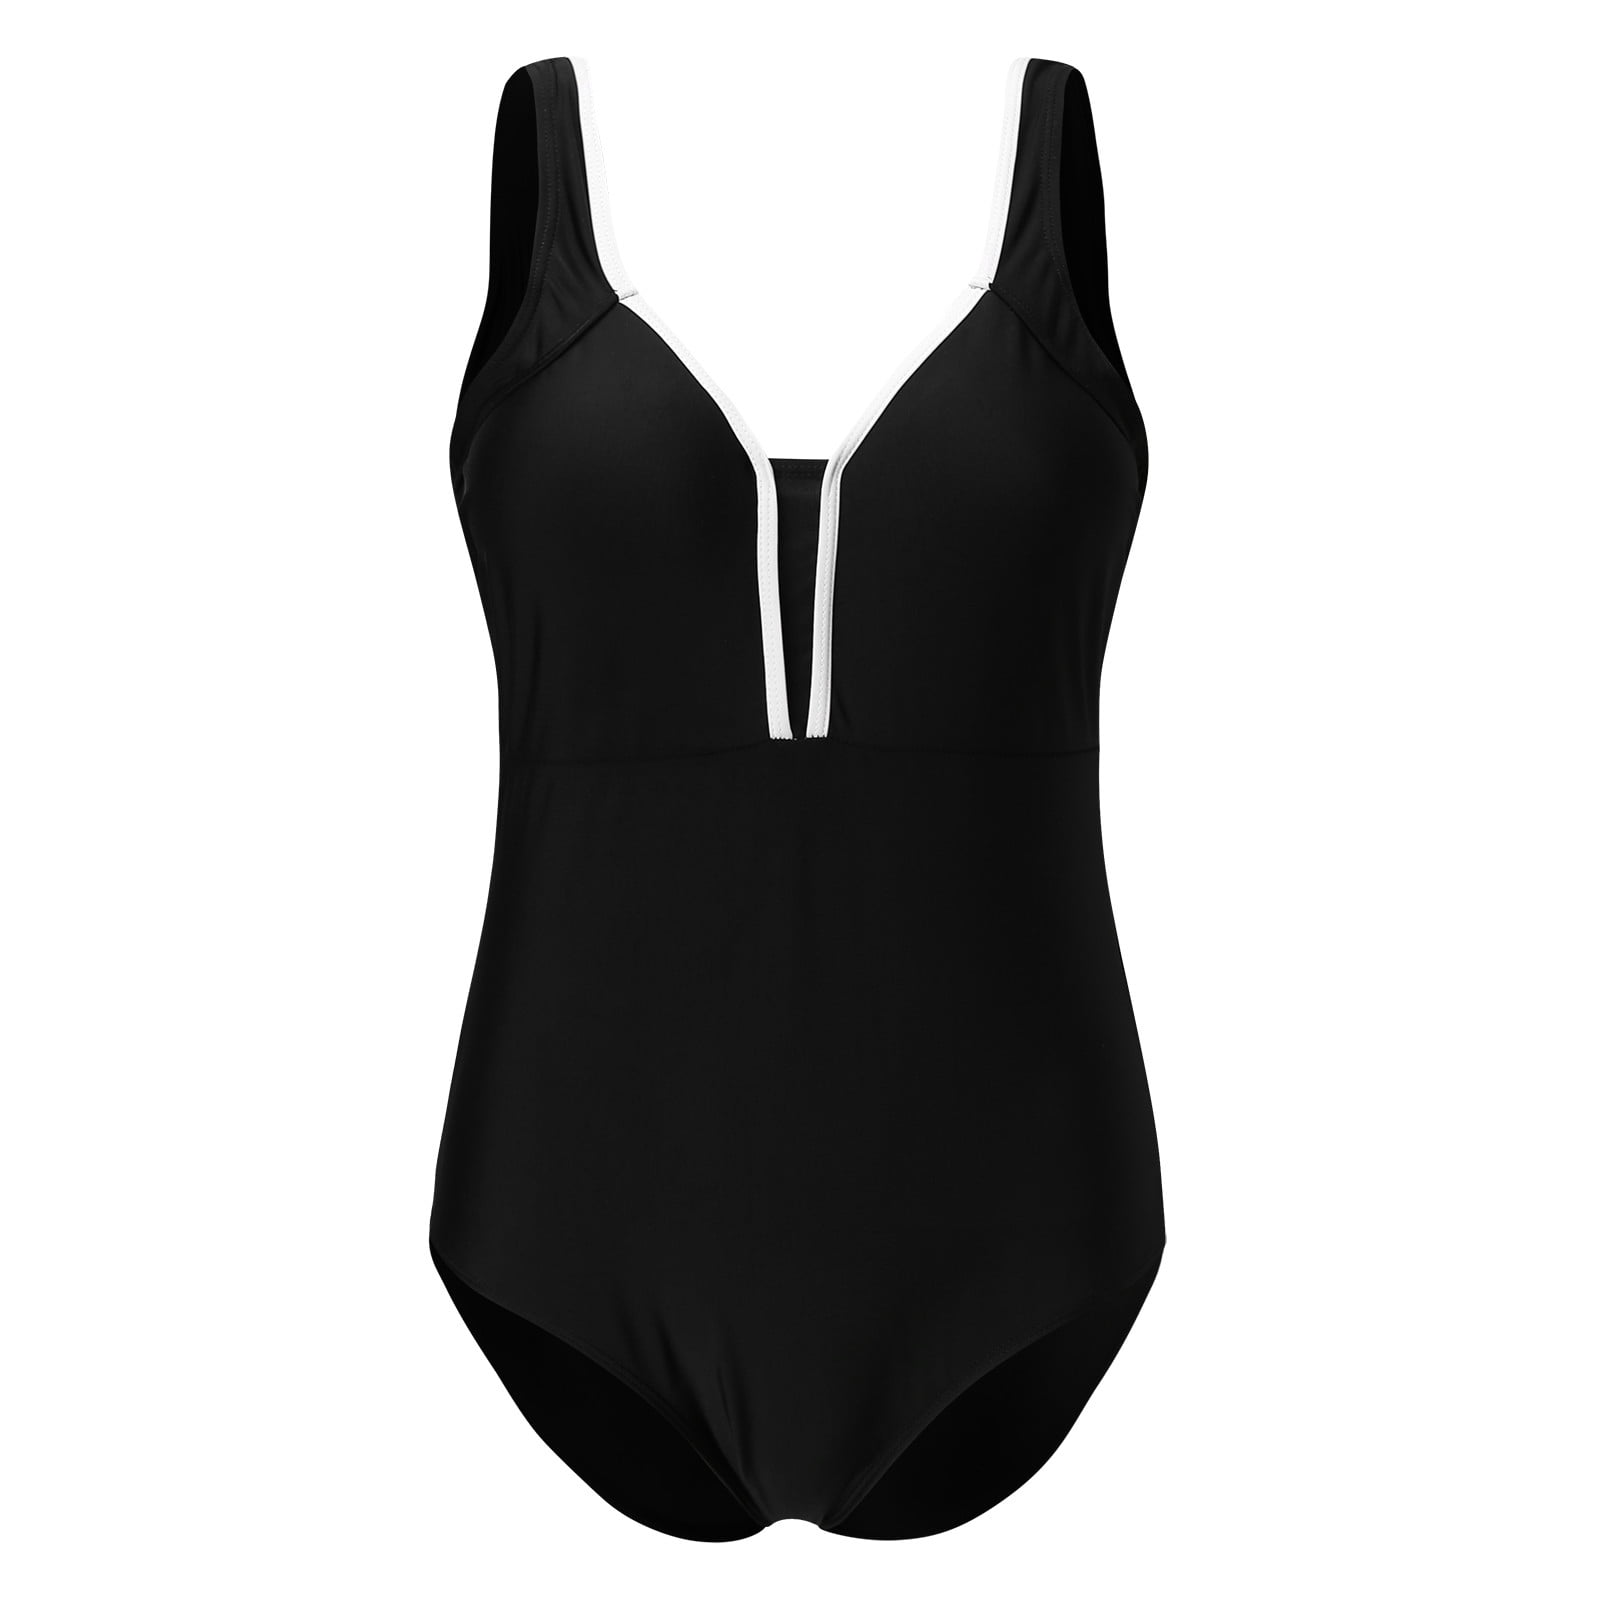 Aayomet Womens Bathing Suits Women's One Piece Swimsuits Tummy Control ...